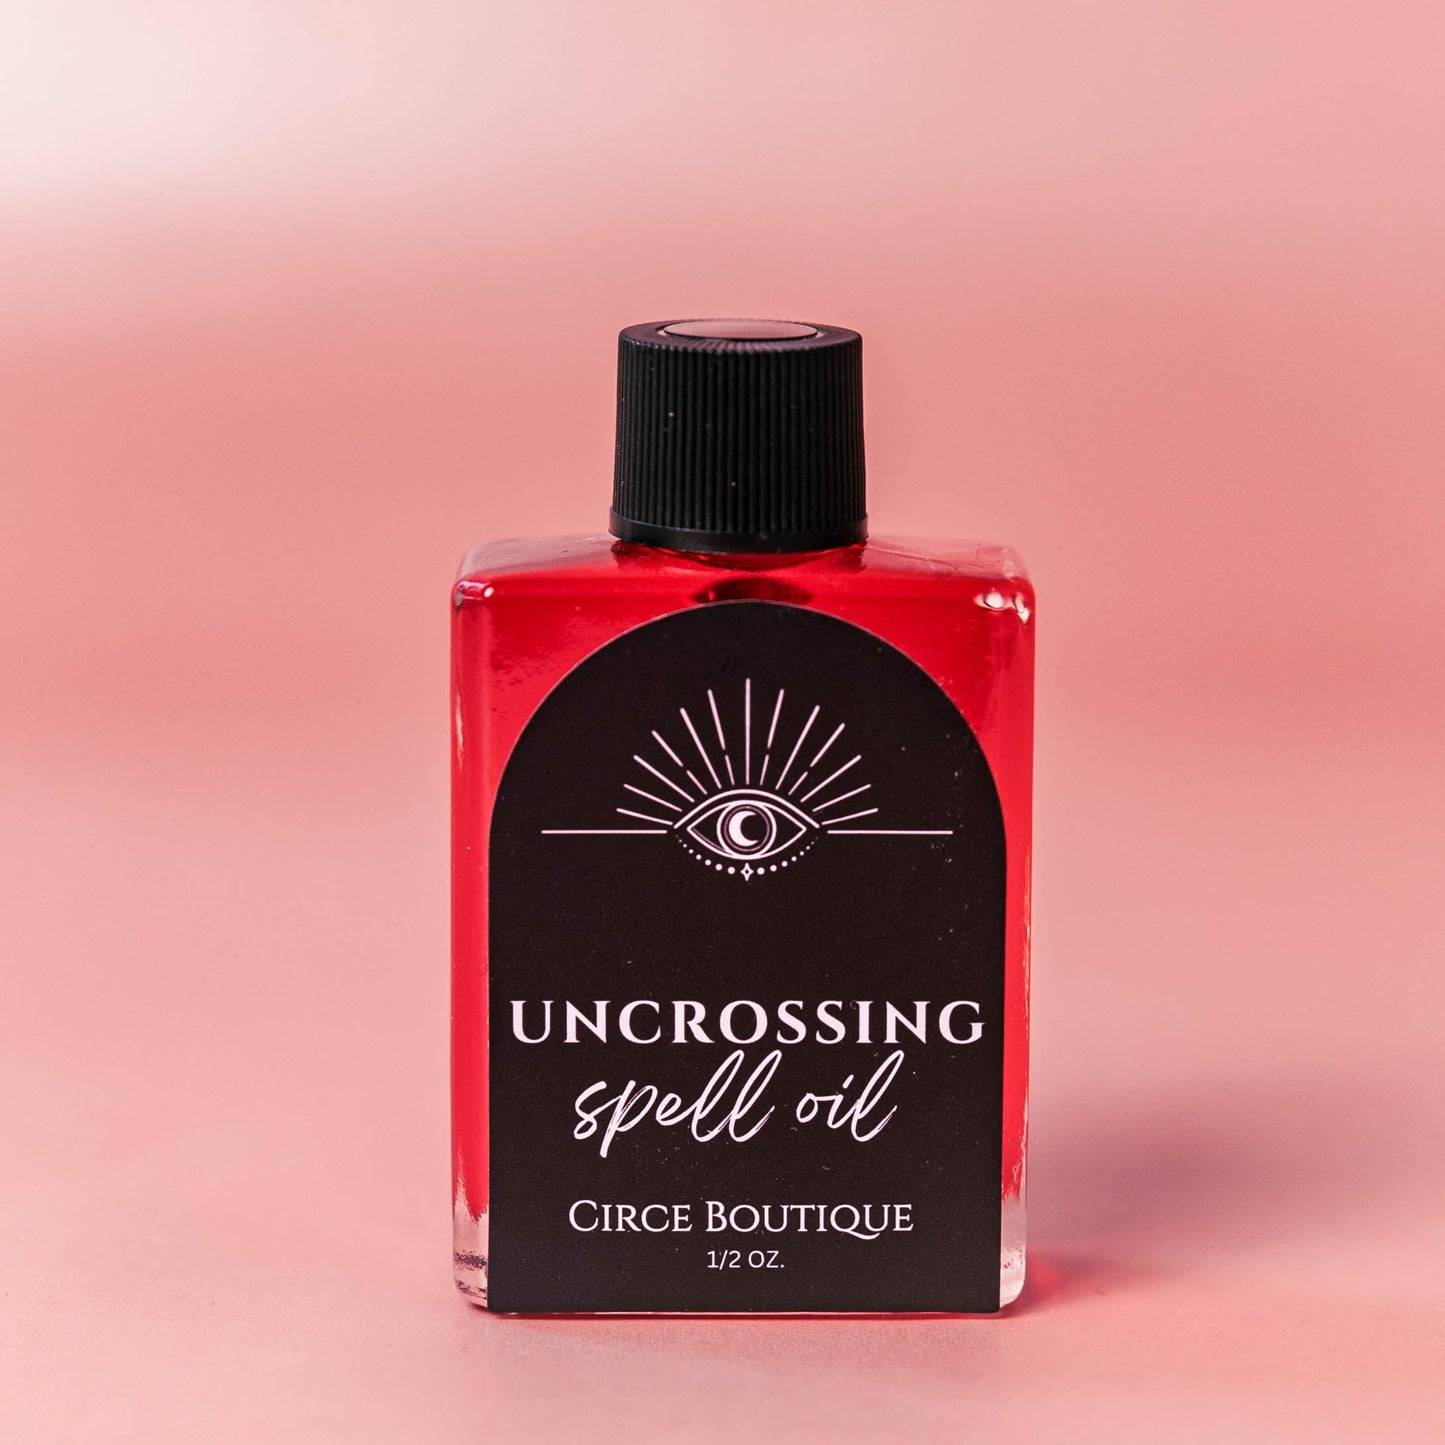 CIRCE Uncrossing Spell Oil 1/2 oz. - Oil  from CirceBoutique